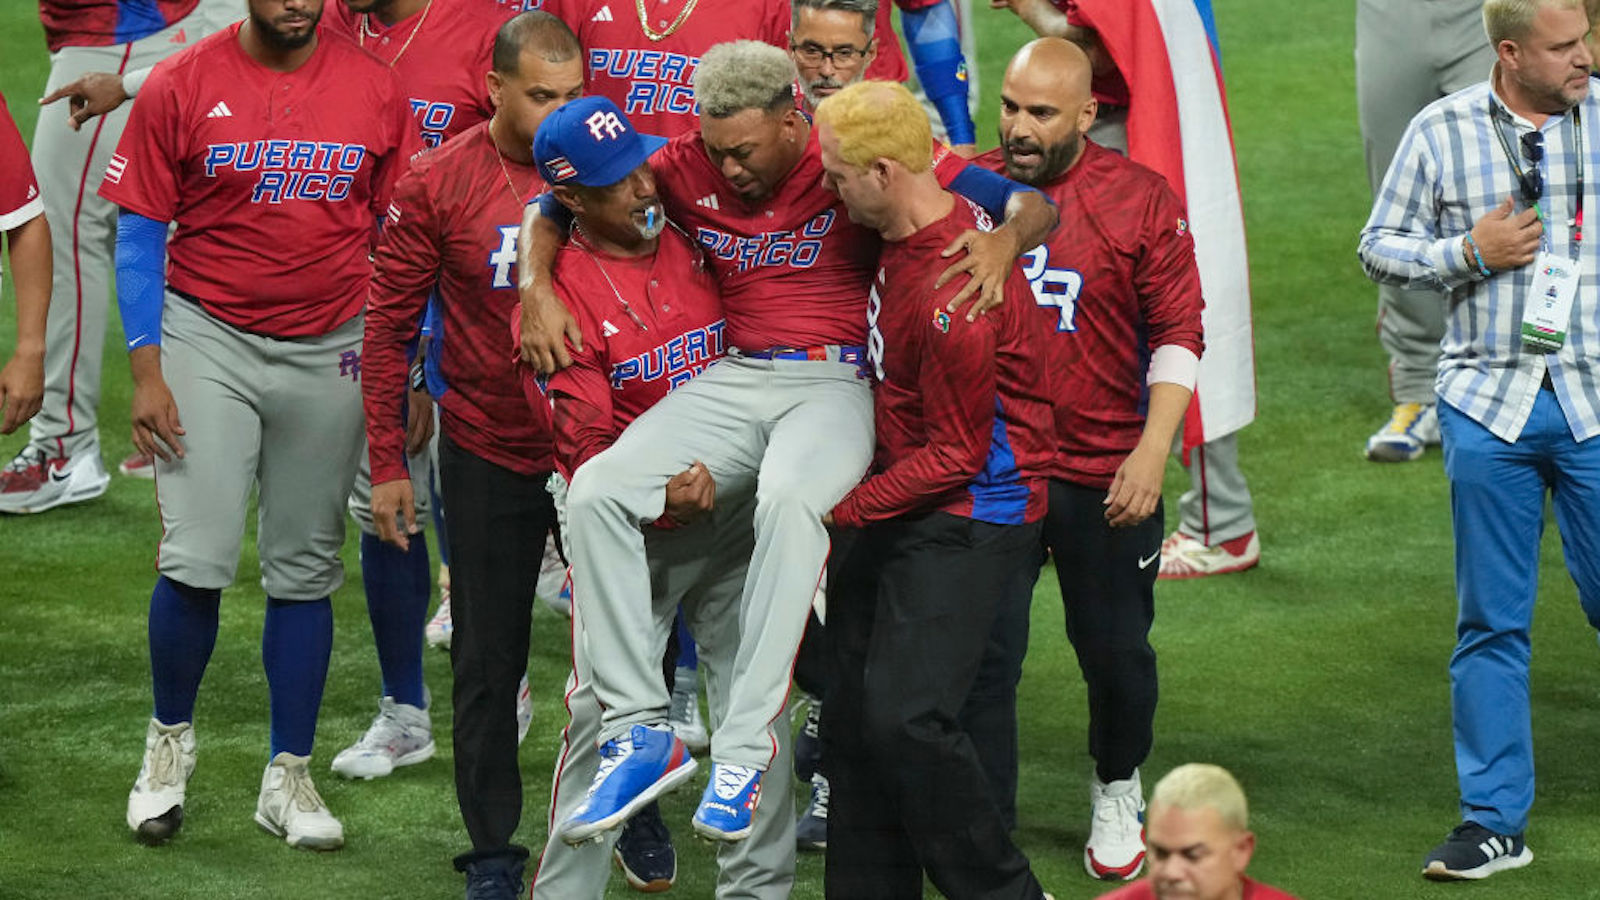 MIAMI, FLORIDA - MARCH 15: Edwin Diaz #39 of Puerto Rico is helped off the field after being injured during the on-field celebration after defeating the Dominican Republic during the World Baseball Classic Pool D at loanDepot park on March 15, 2023 in Miami, Florida.